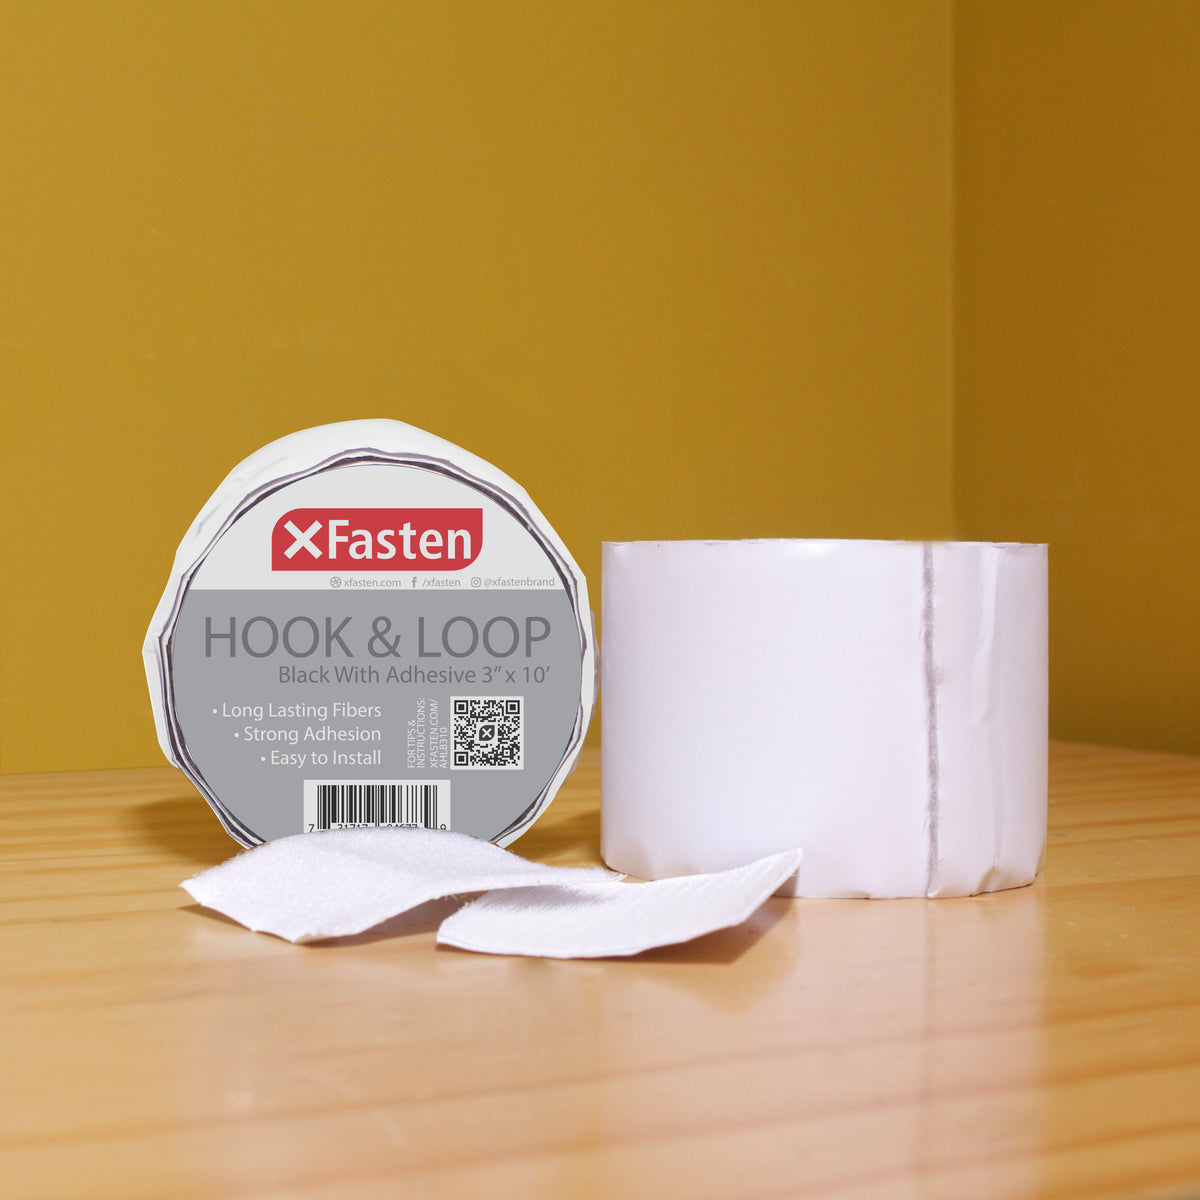 Uses for Self-Adhesive Hook and Loop Tape That You Didn't Know About —  XFasten